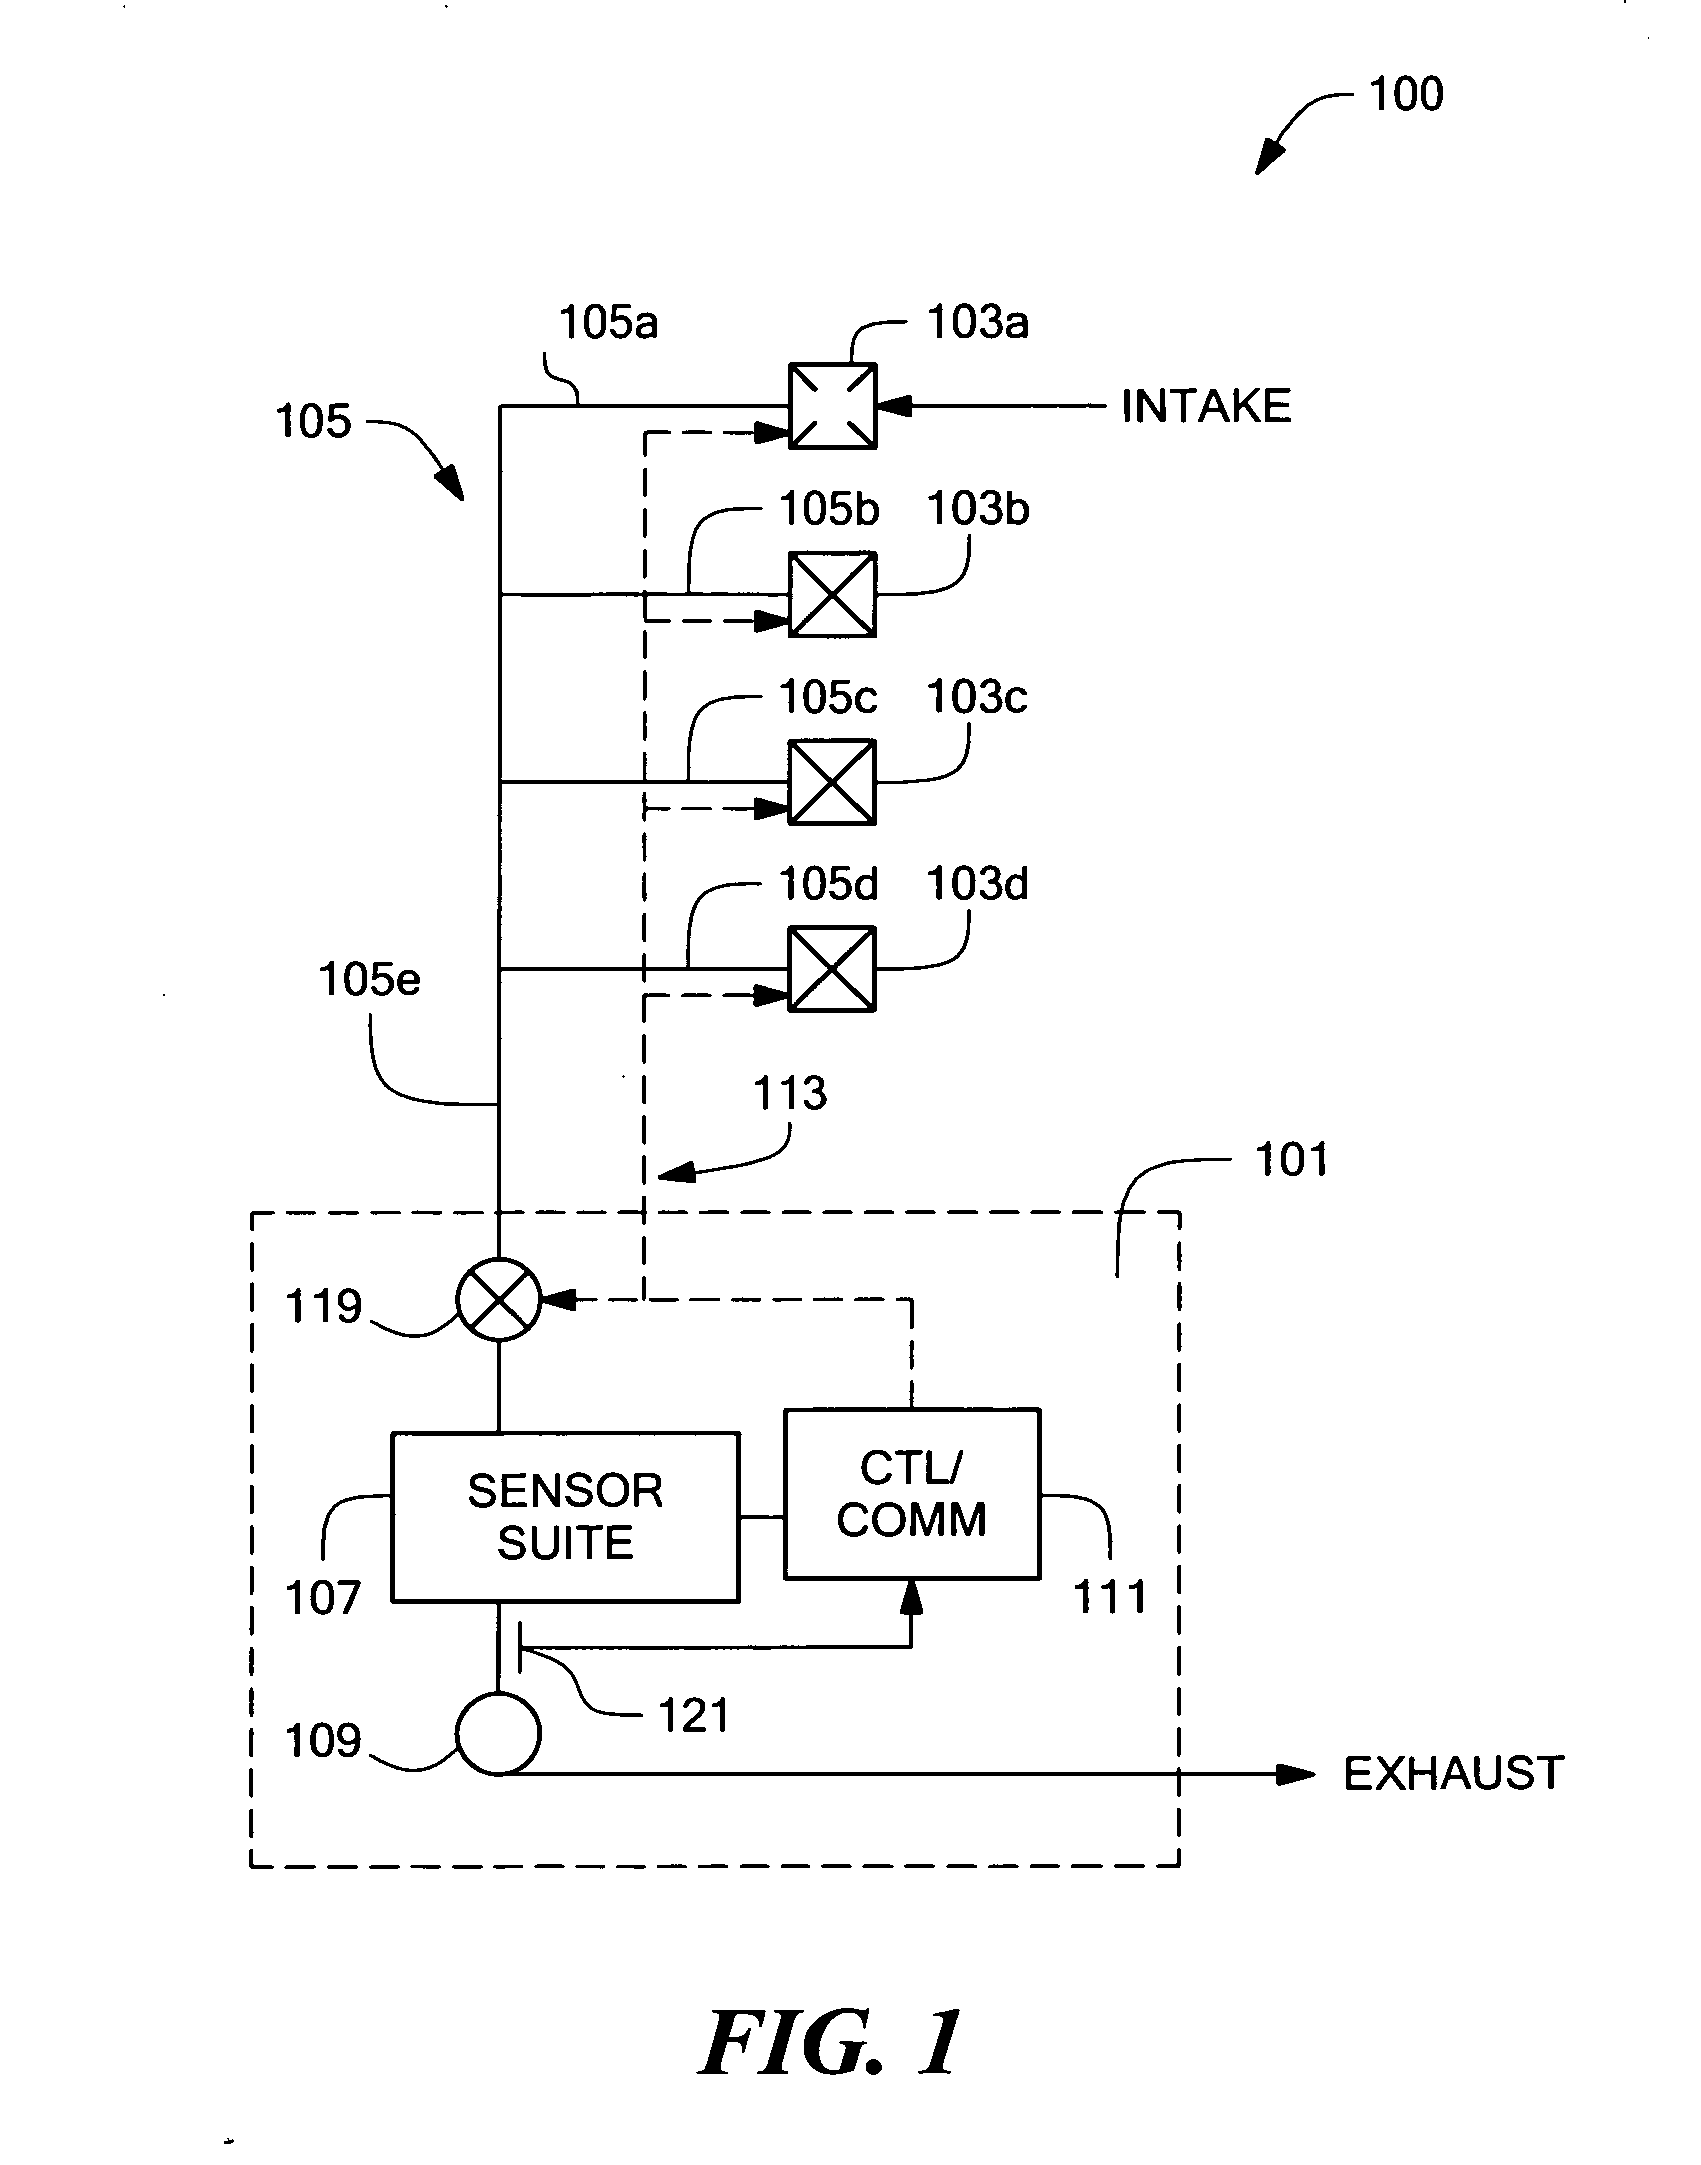 Tubing for transporting air samples in an air monitoring system